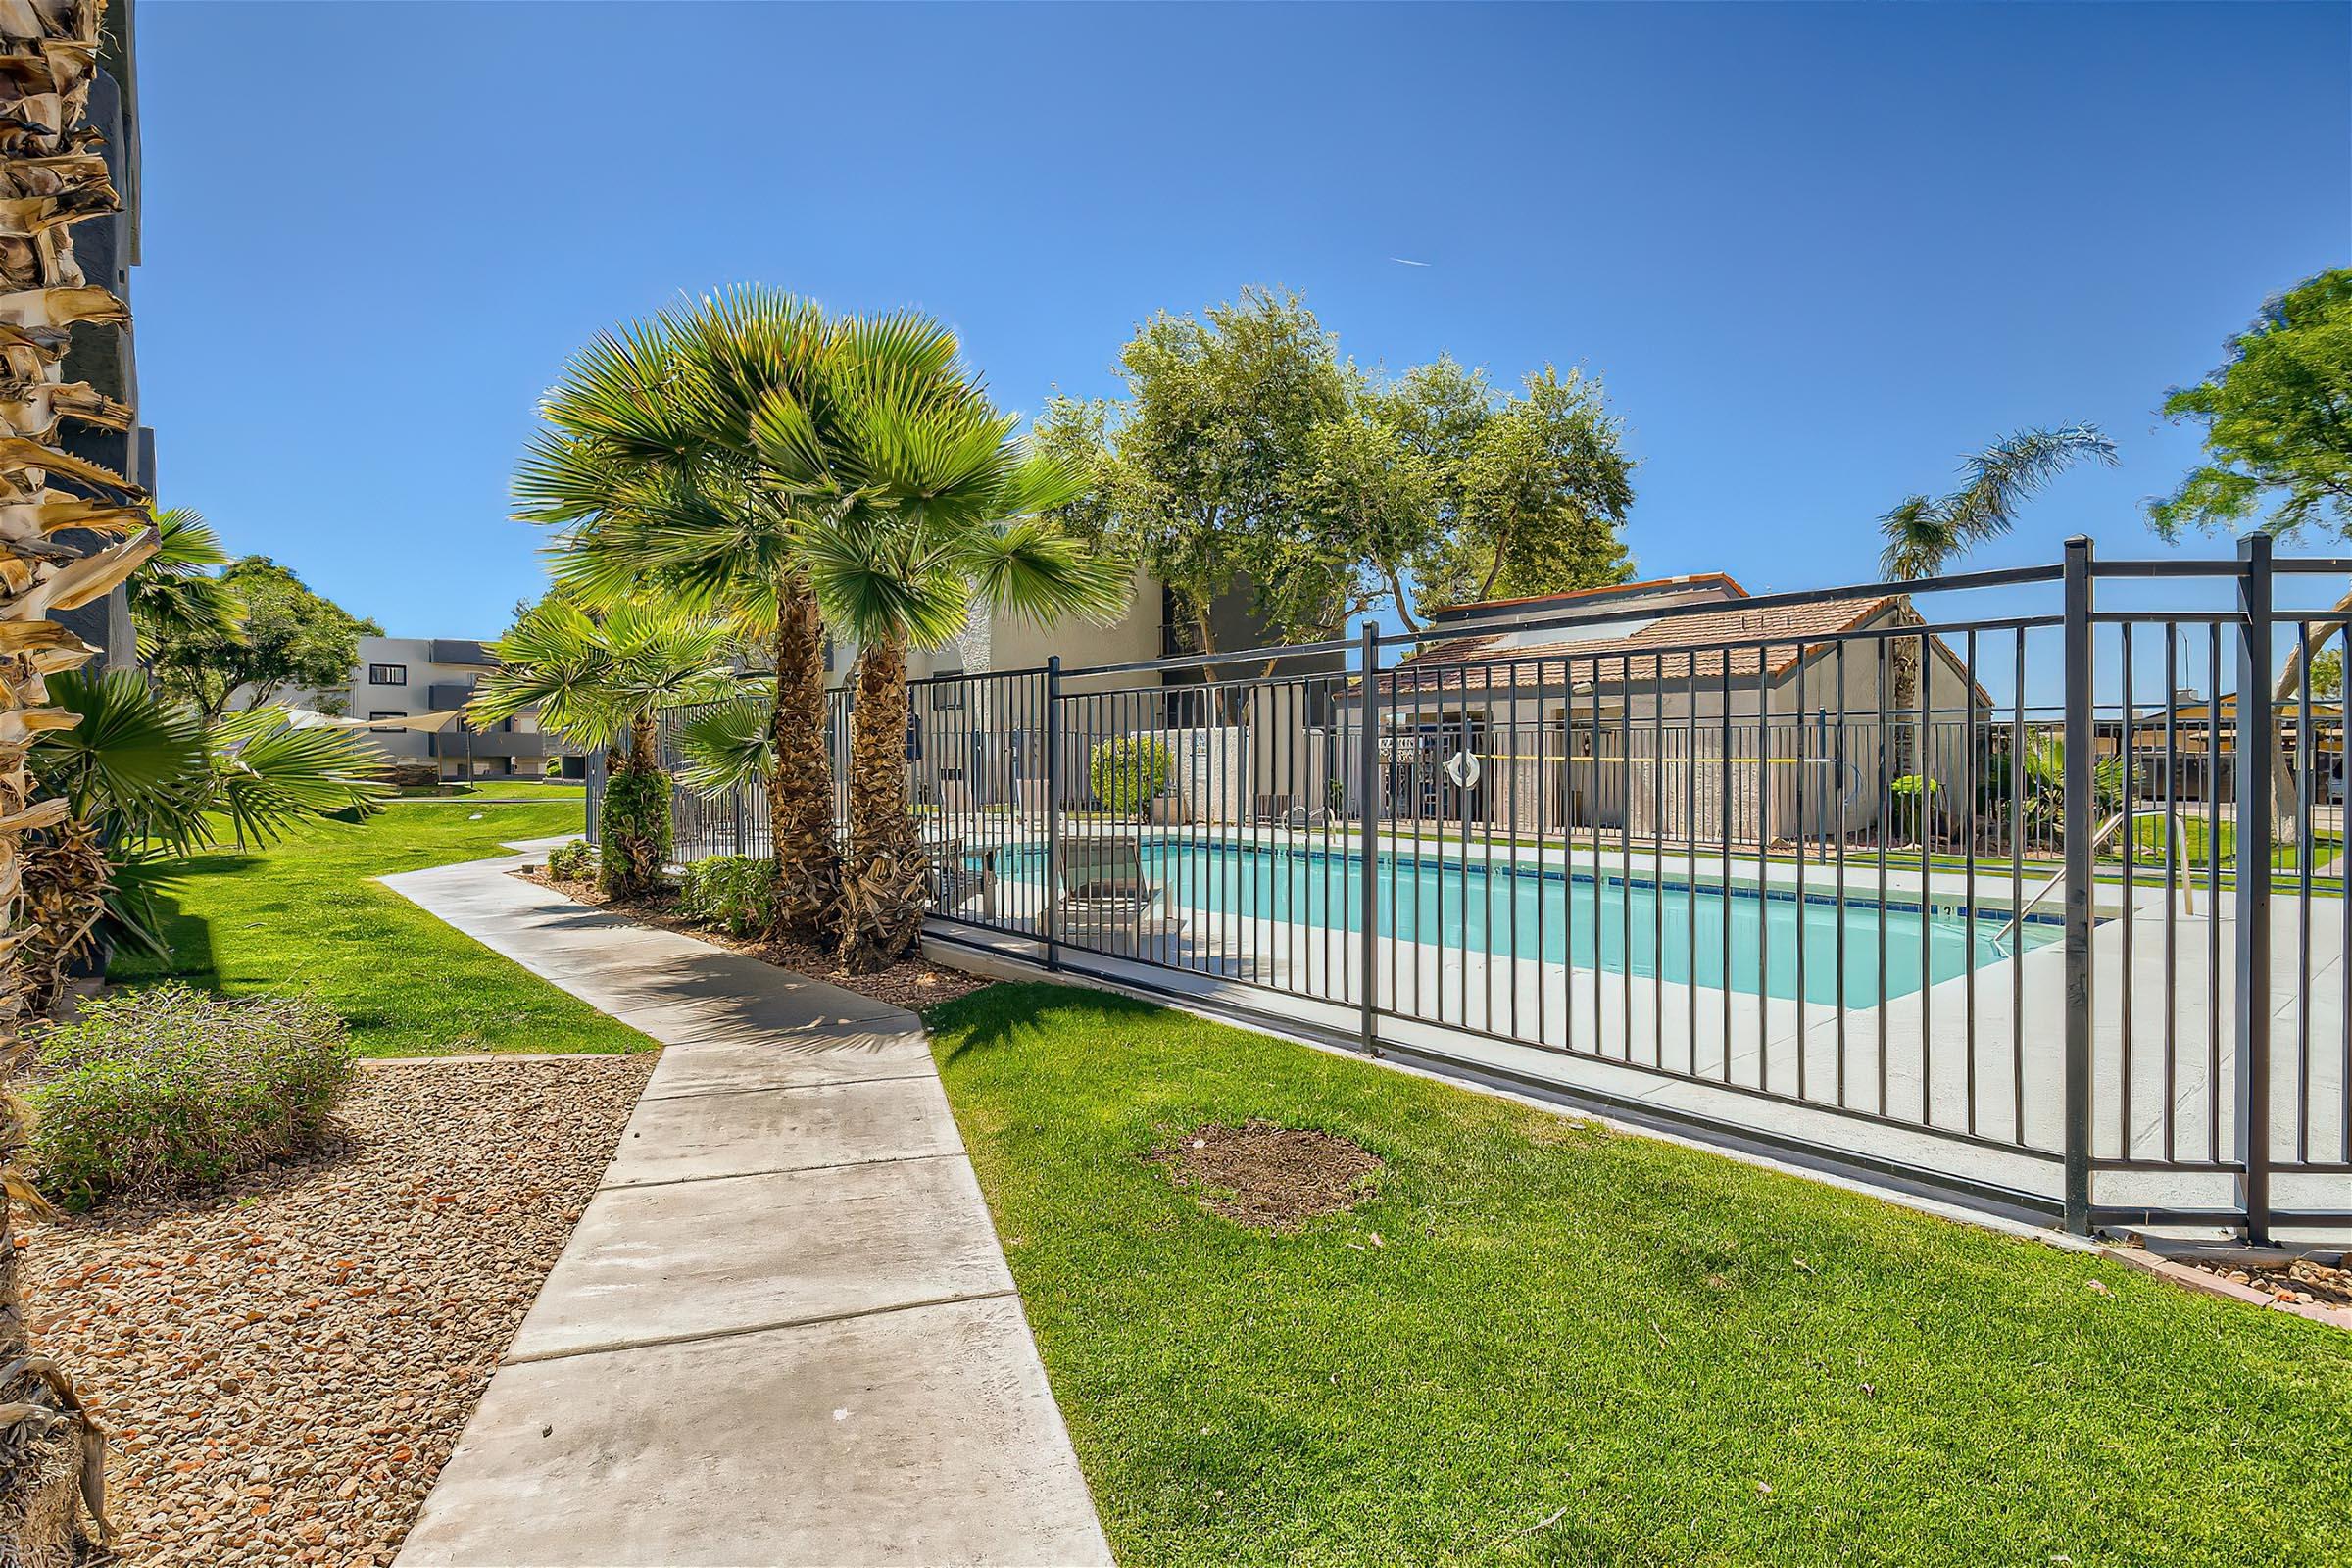 View of the Rise at Dobson Ranch outdoor swimming pool from behind an iron fence